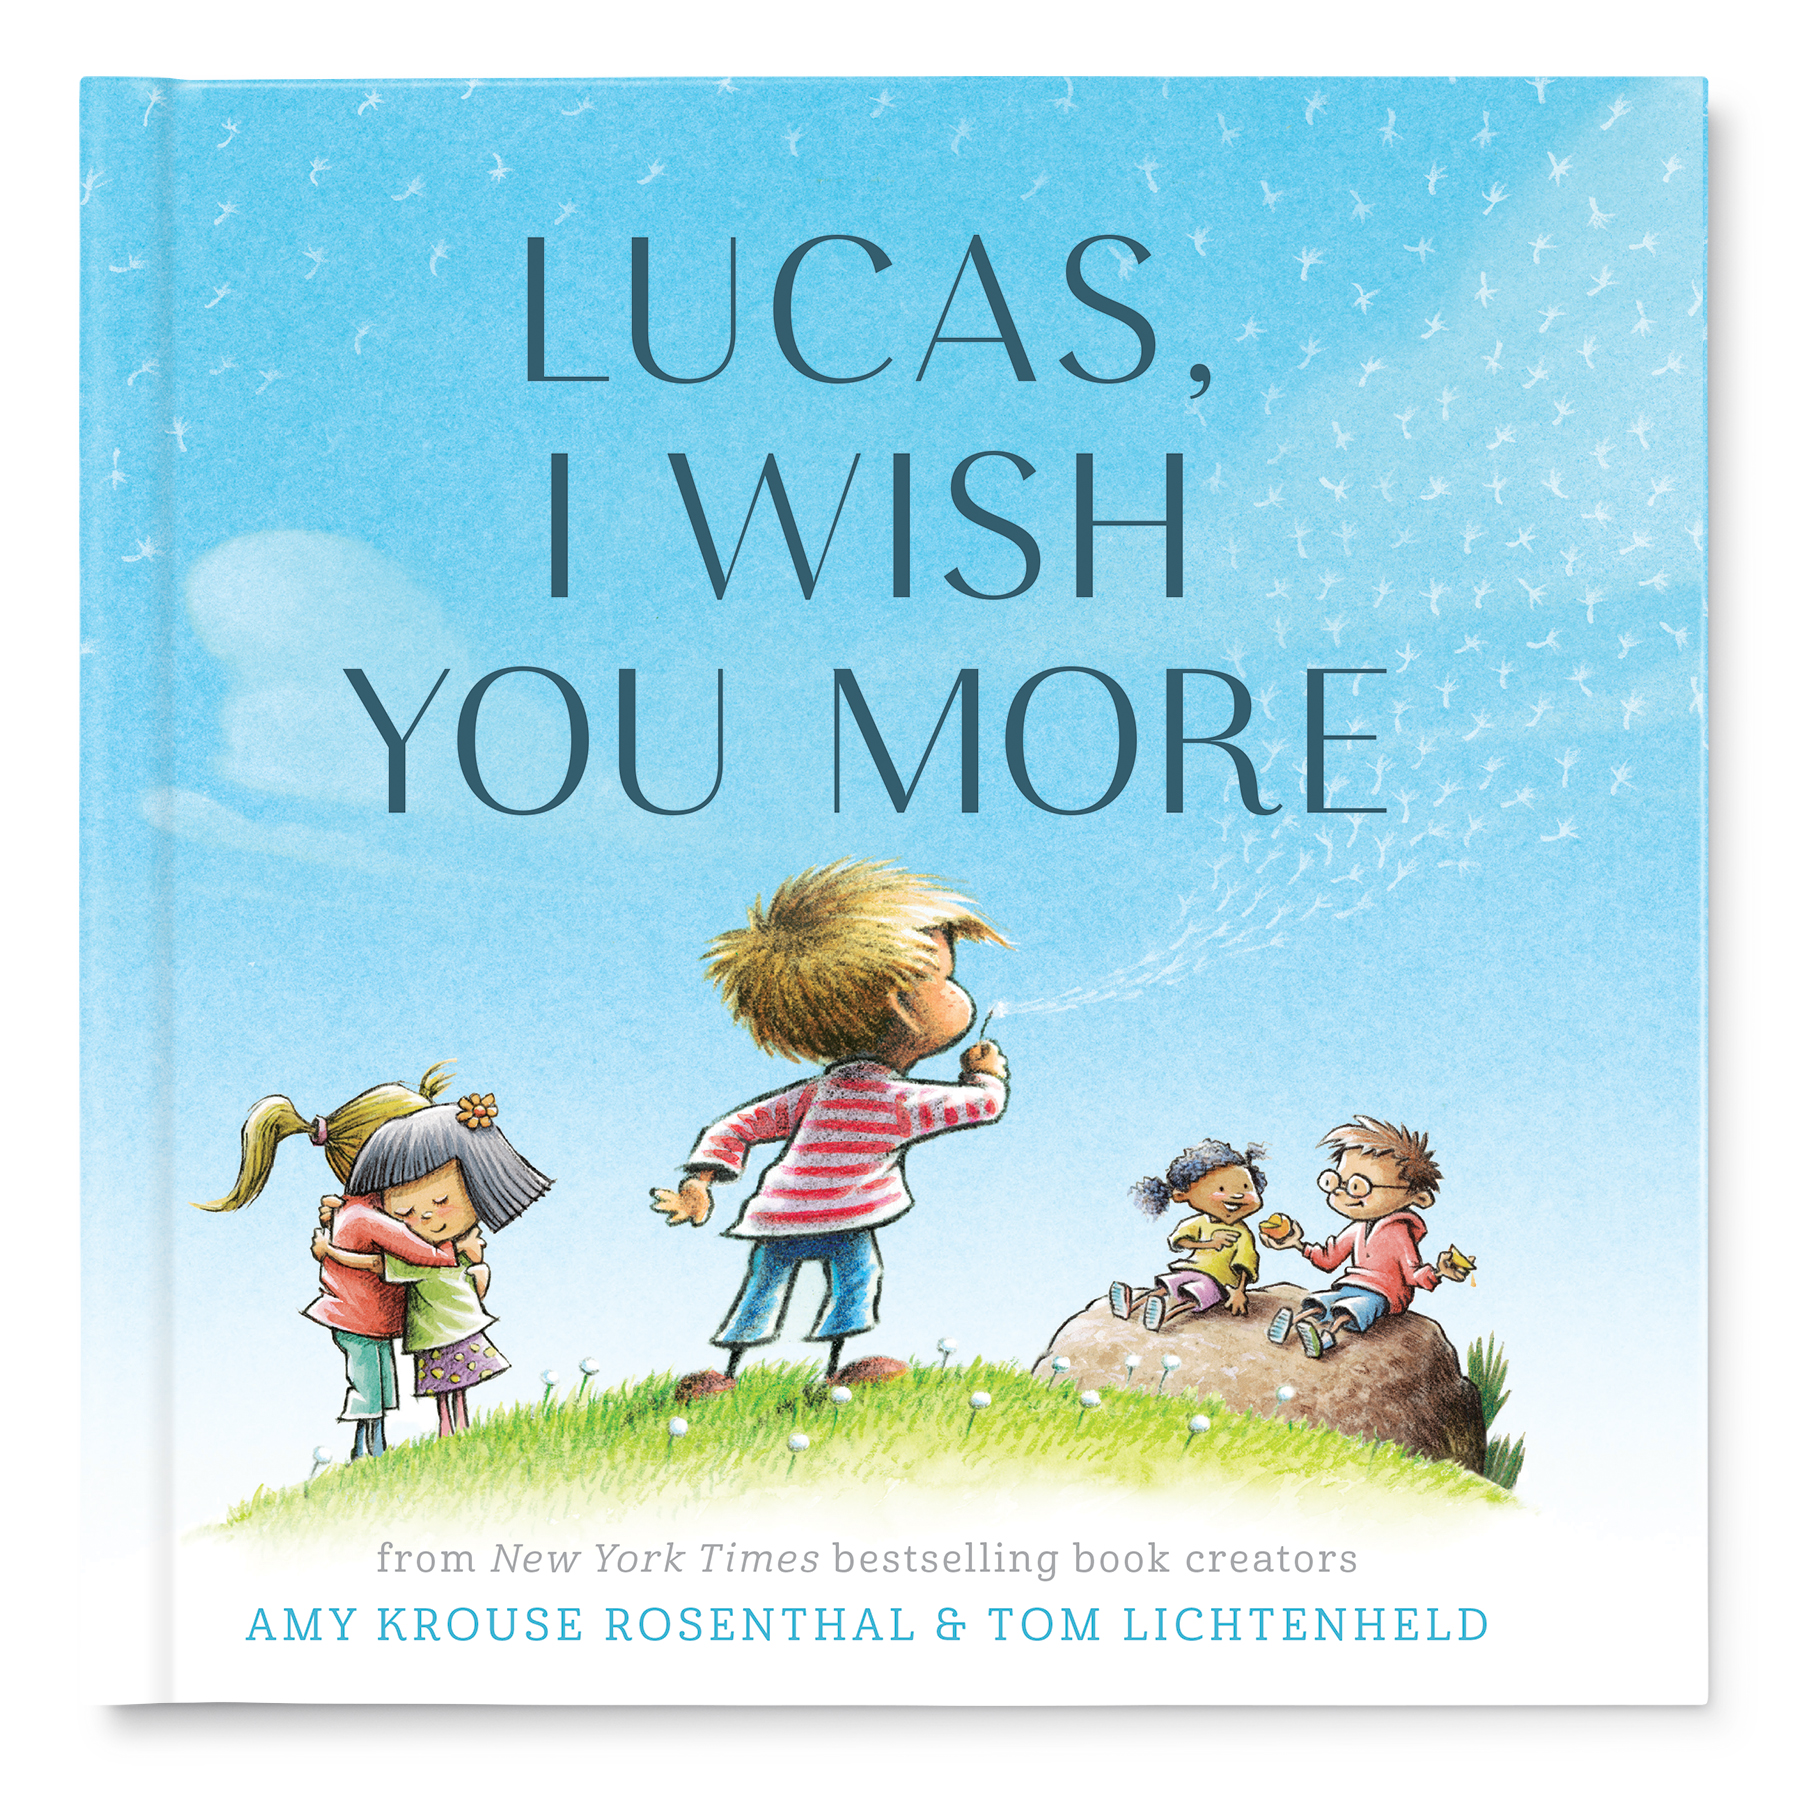 Renowned book creators Amy Krouse Rosenthal and Tom Lichtenheld released the personalized version of their New York Times bestselling children’s book, "I Wish You More," at ISeeMe.com.